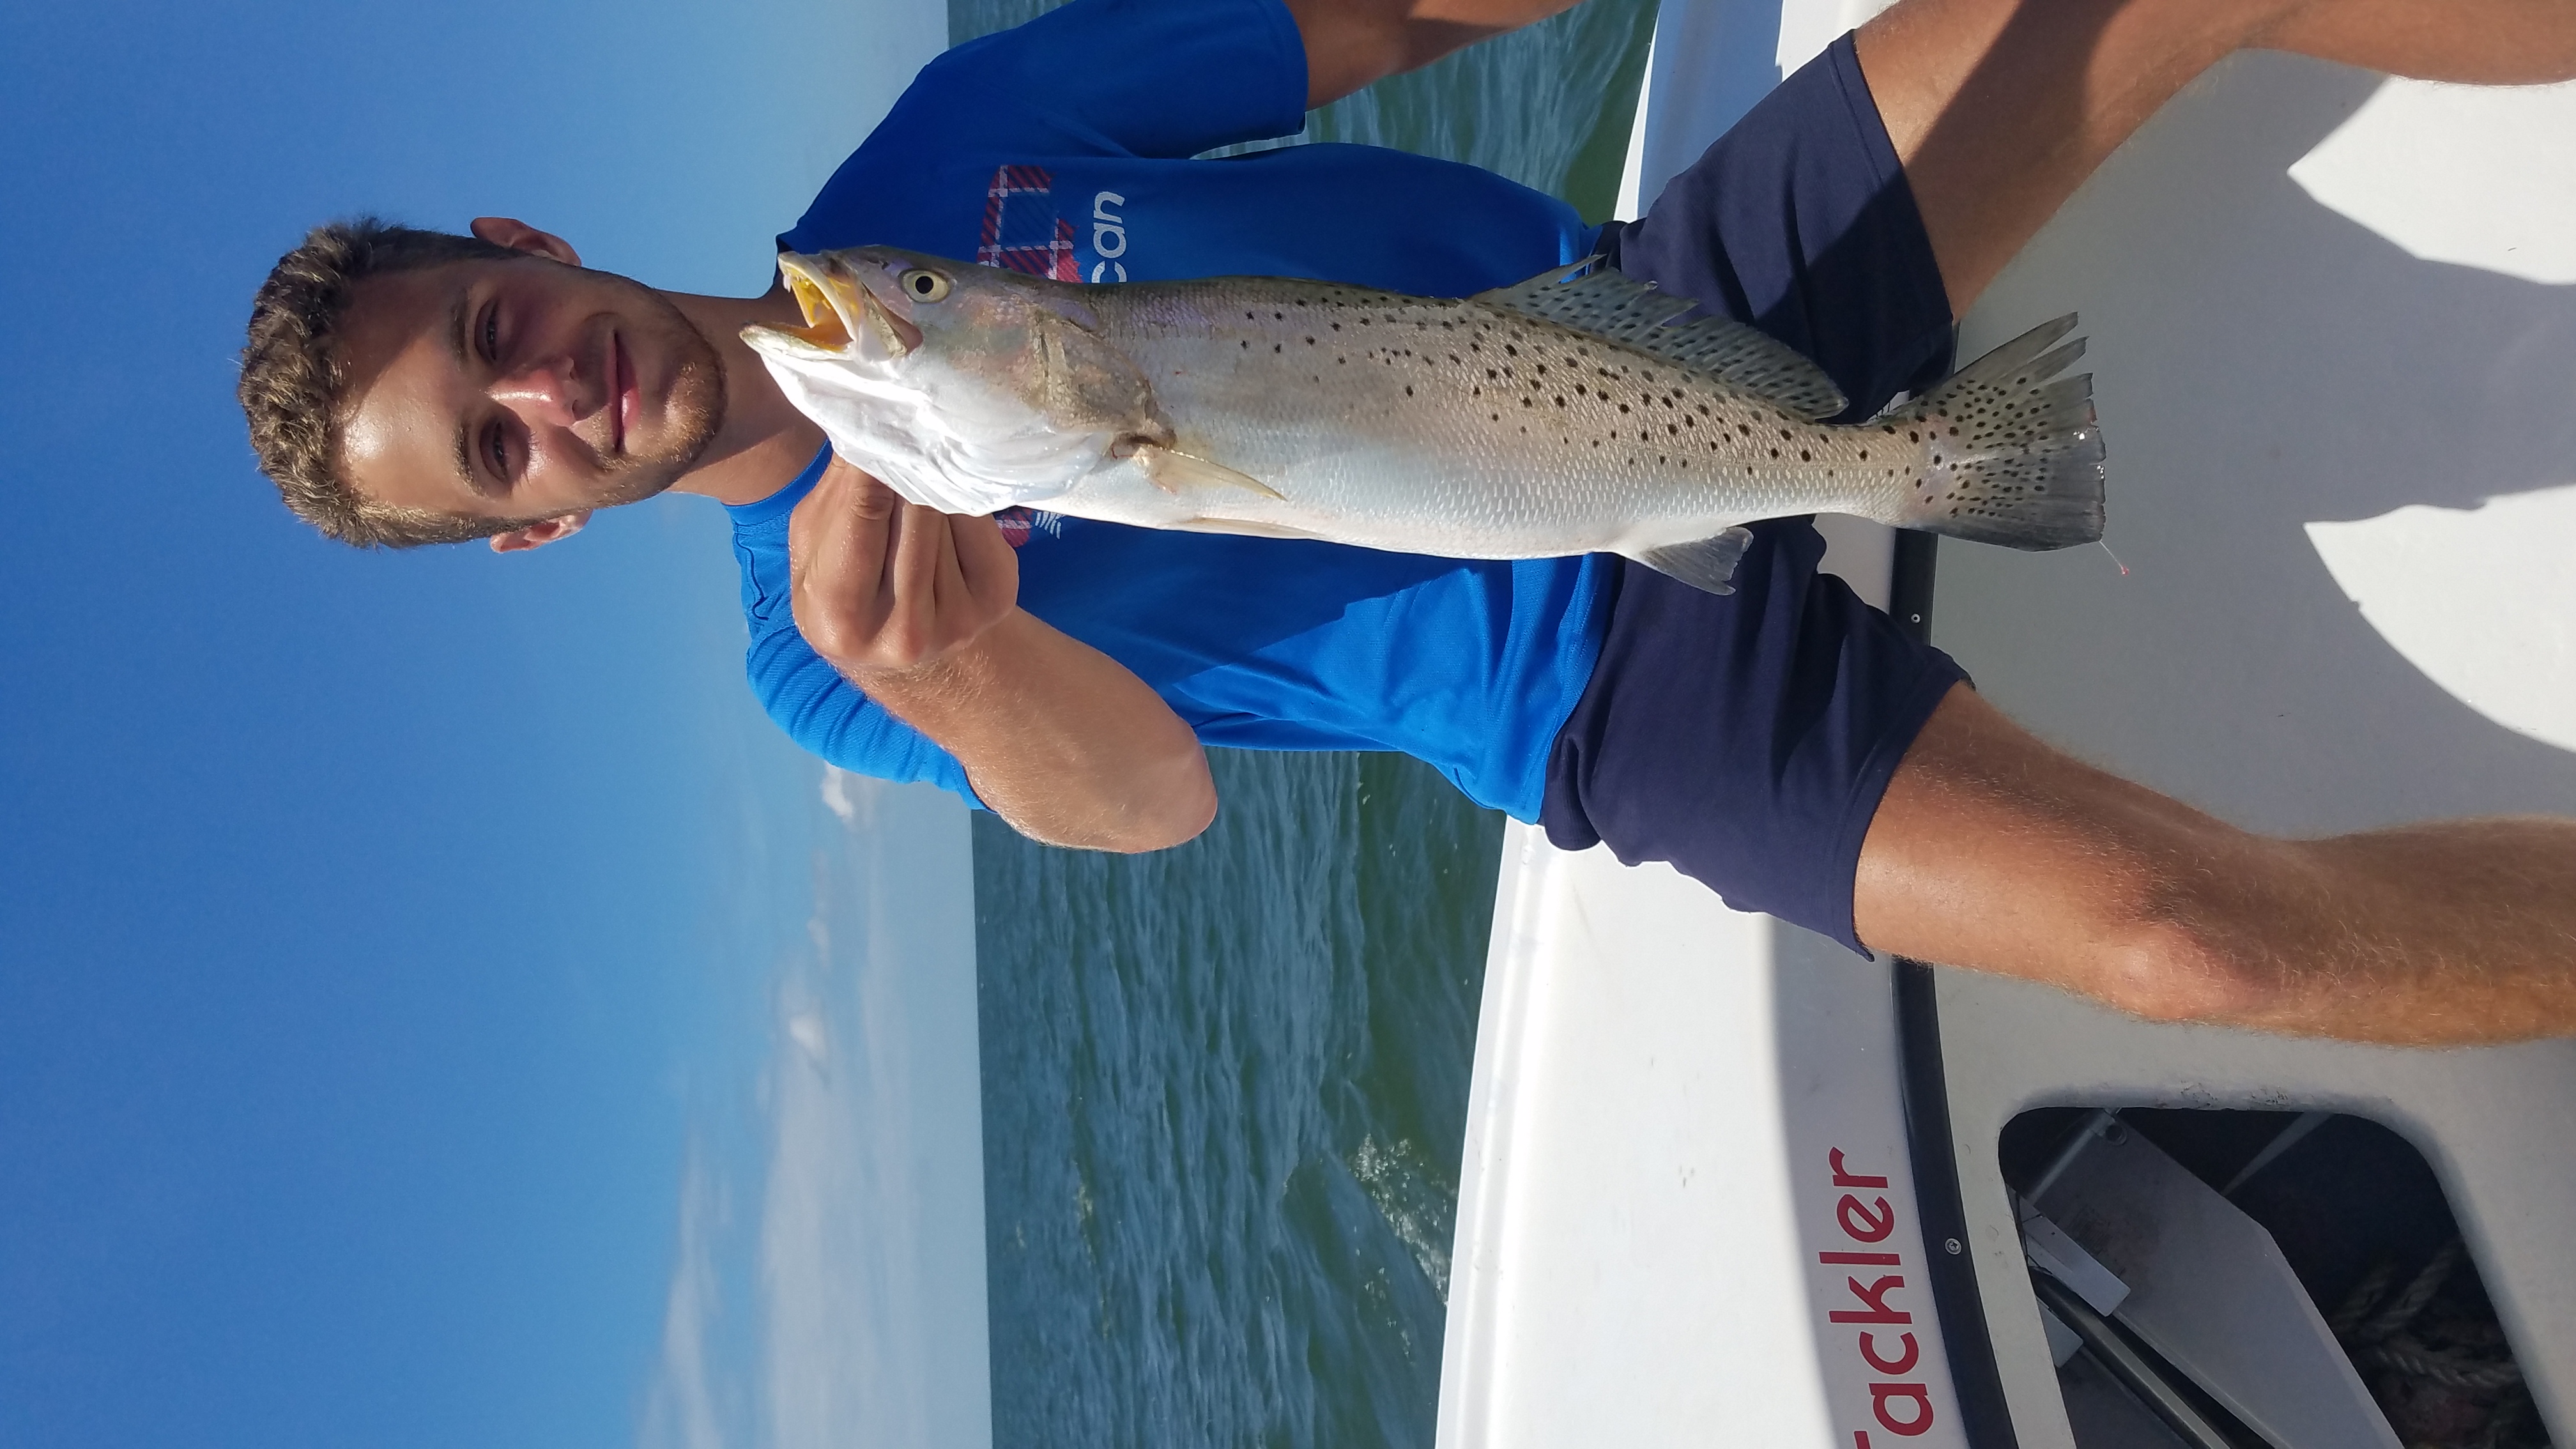 Speck-Tackler Fishing Speckled Trout Teach's Lair